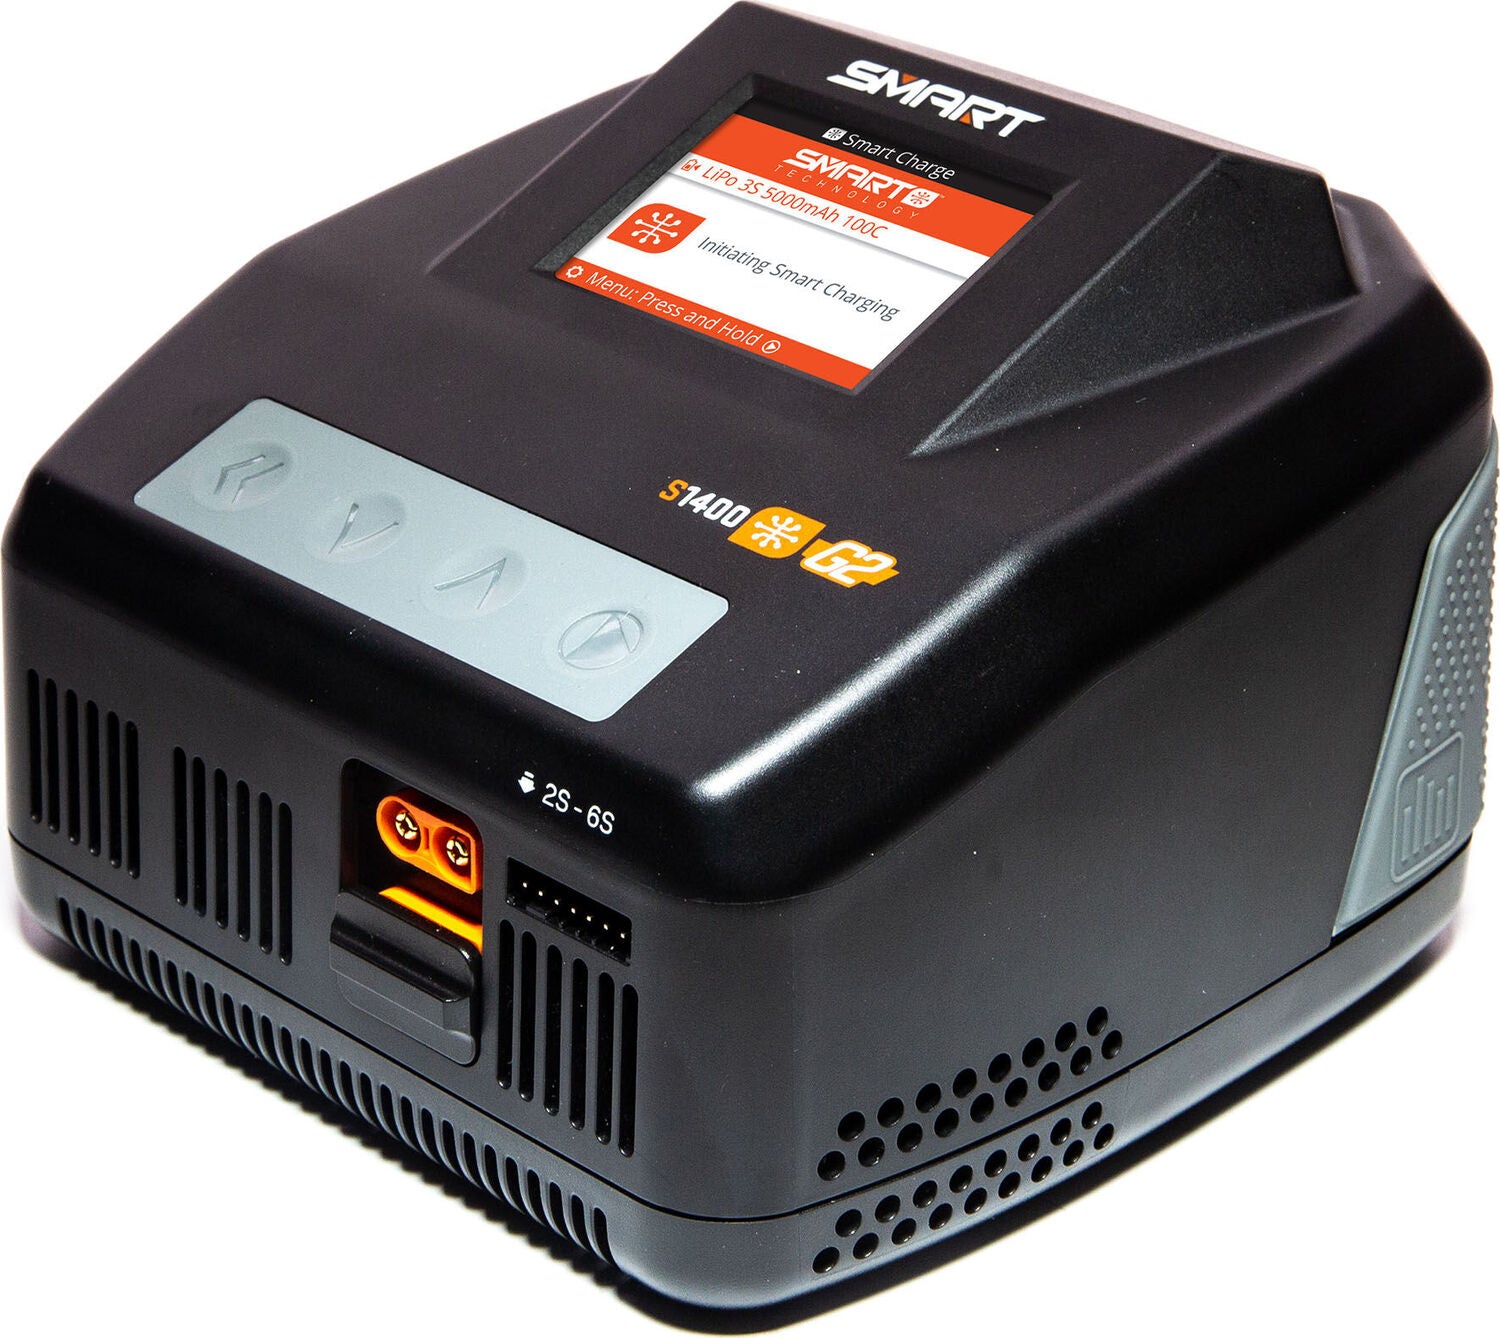 S1400 G2 AC 1x400W Smart Charger